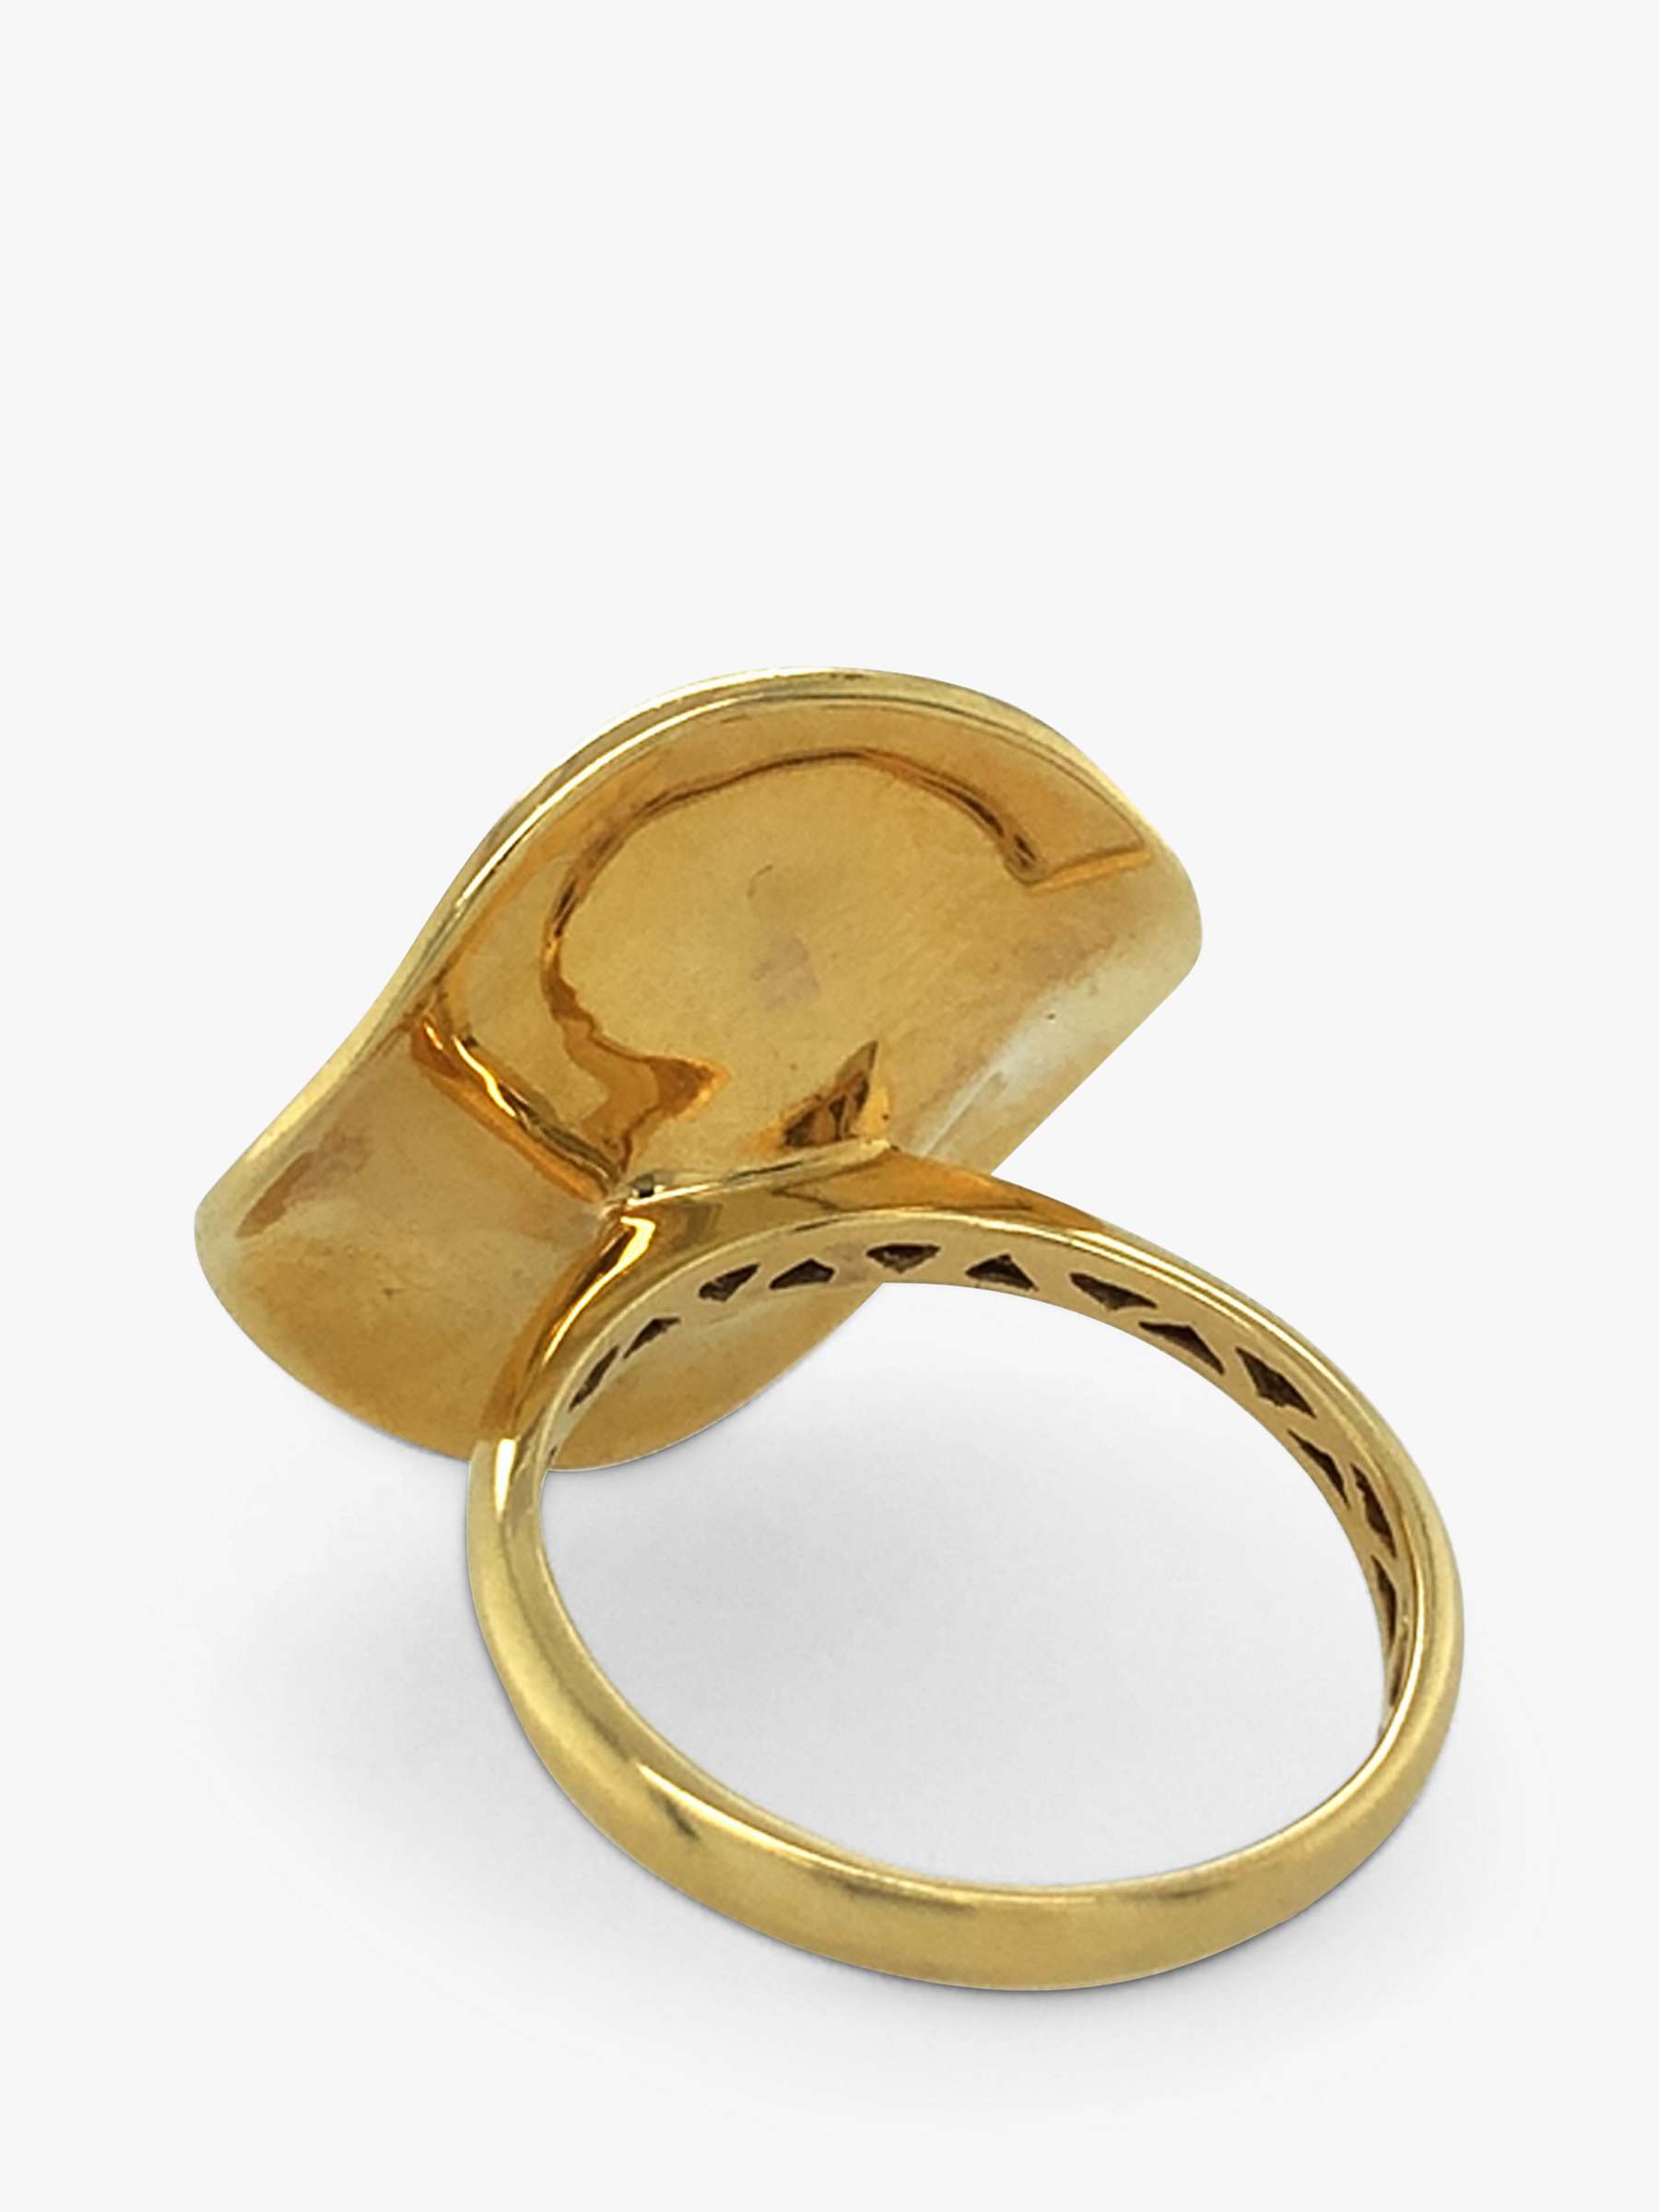 Buy Vintage Fine Jewellery Second Hand 18ct Yellow Gold Diamond Statement Ring, Dated Circa 1990s Online at johnlewis.com